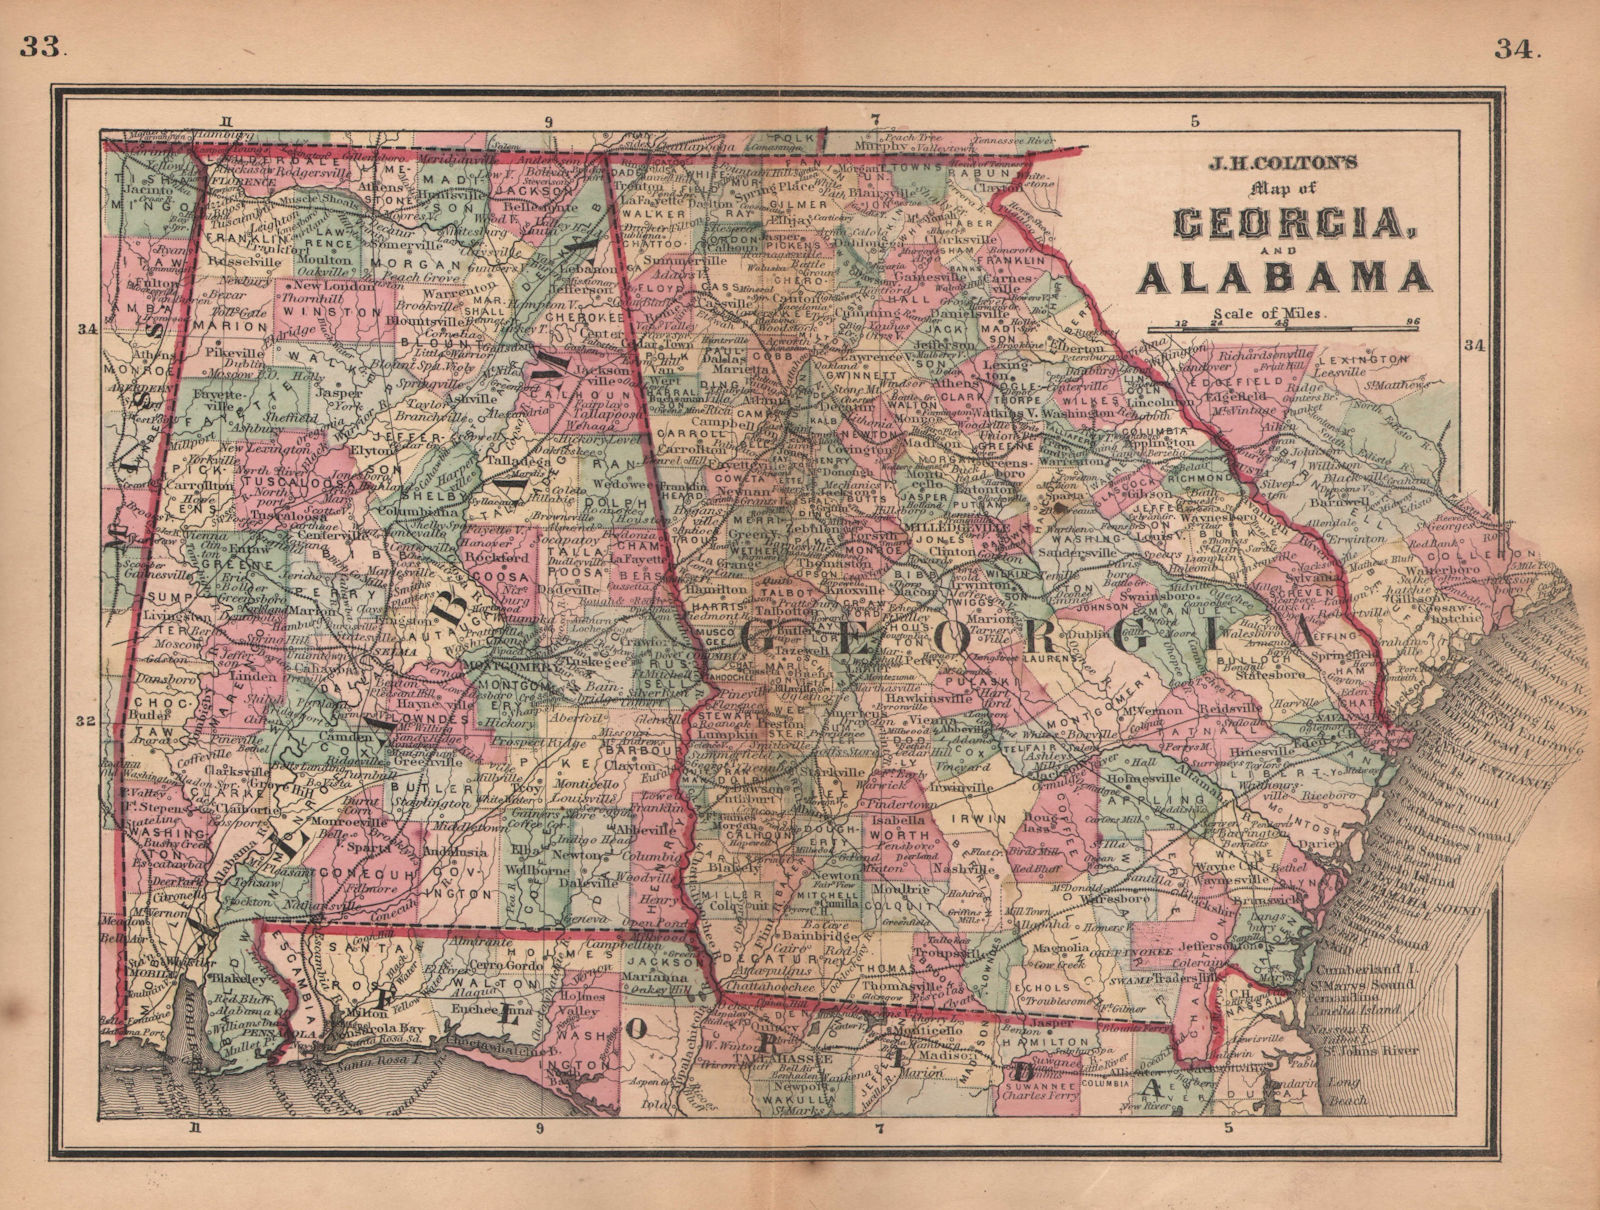 Associate Product J. H. Colton's map of Georgia and Alabama 1864 old antique plan chart